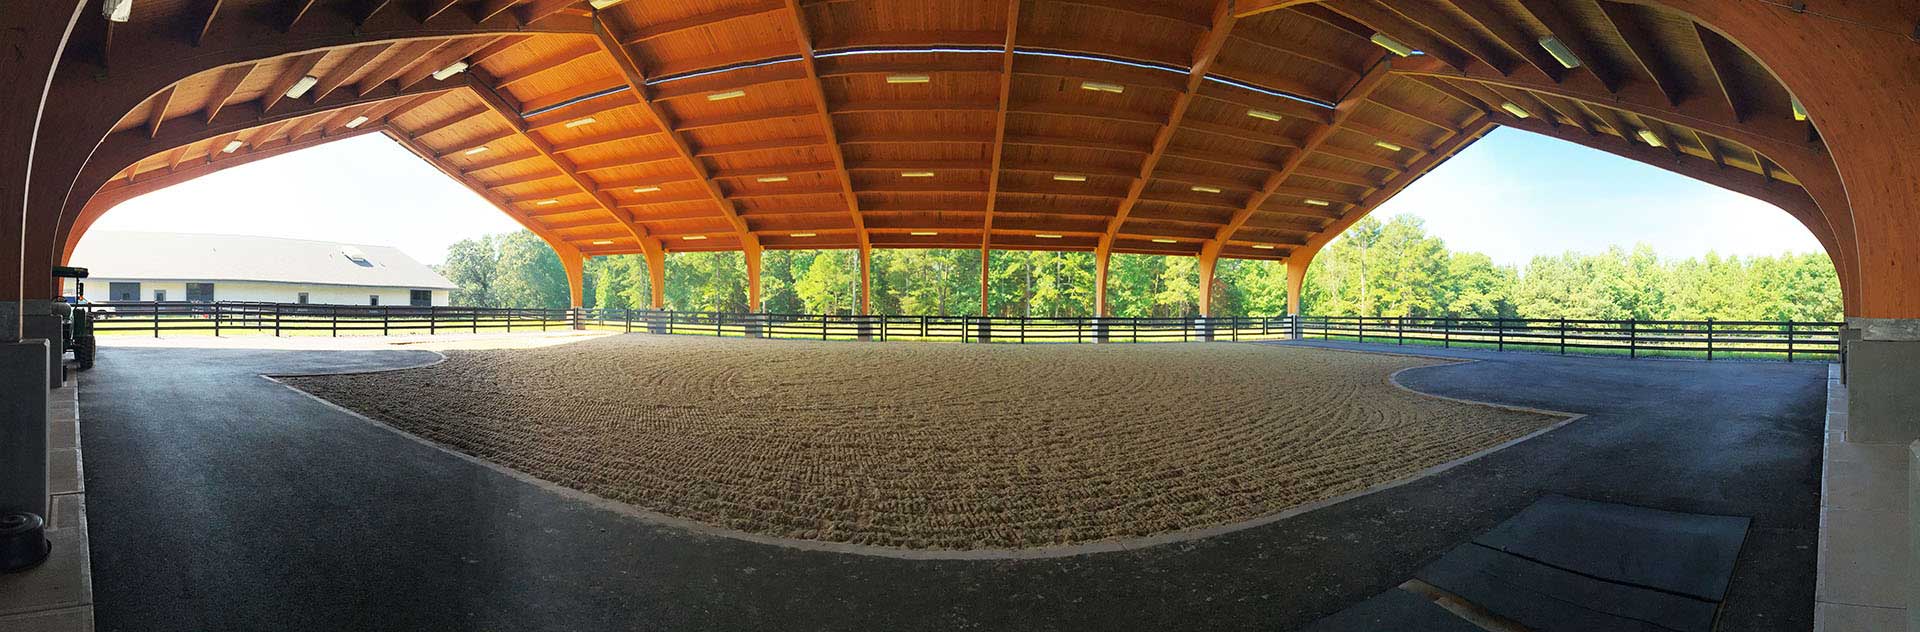 A large empty riding arena with a carpet on the ground.